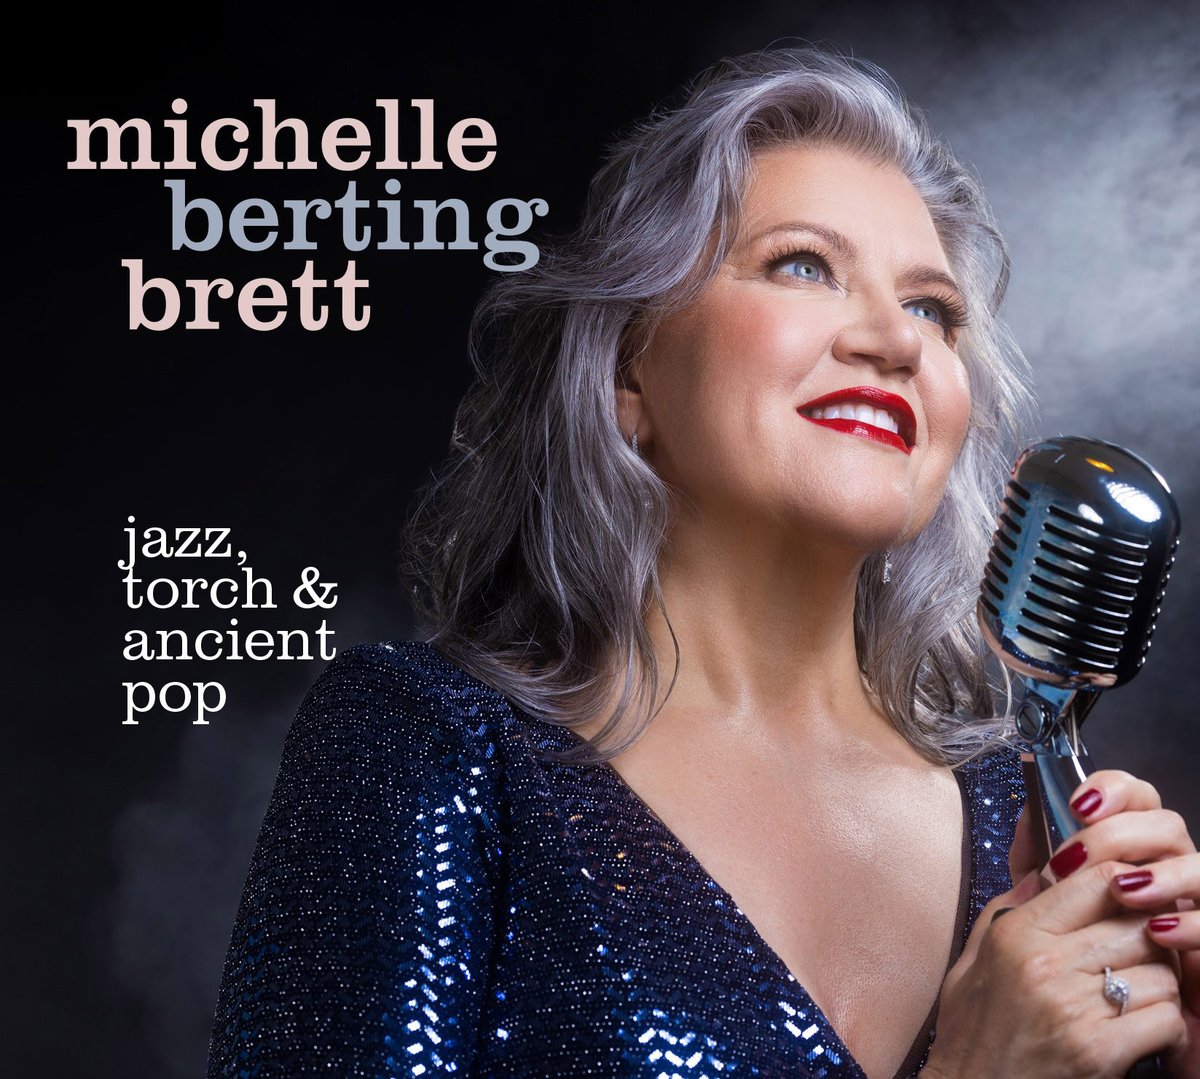 TONIGHT - A lovely evening with Michelle Berting Brett @michellebbrett ~ Jazz, Torch & Ancient Pop – CD Release Concert, November 8th at @RevivalBarEvent.

Event details: revivaleventvenue.ca/event/michelle… #jazz #adultcontemporary #livemusic